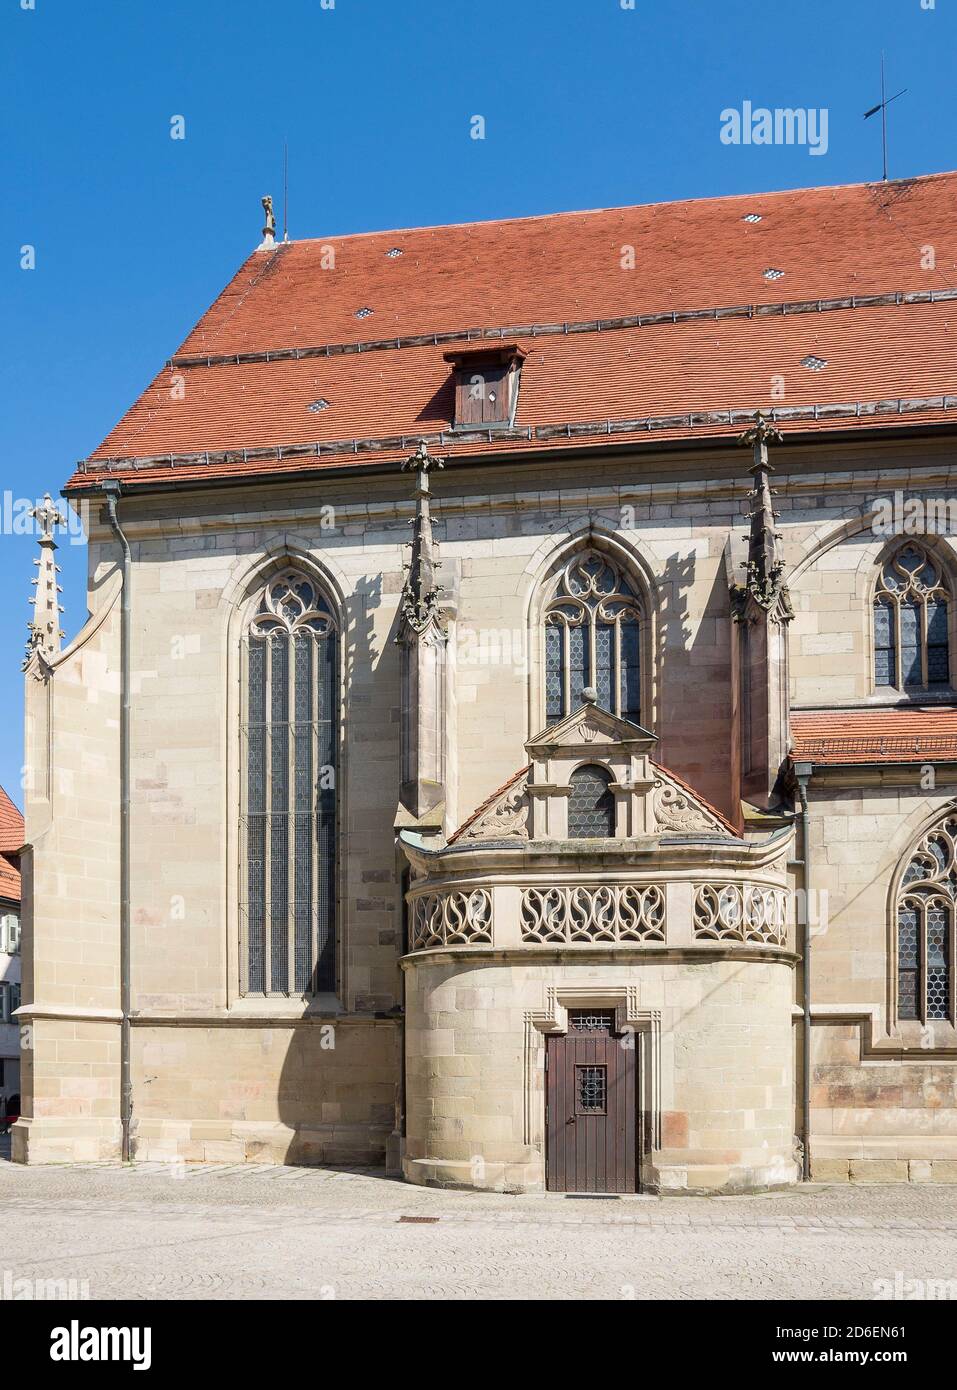 Germany, Baden-Württemberg, Schorndorf, Ev. City church, nave south side, porch for stairs, Renaissance gable with 2 dolphins, staircase for twin spiral staircase from 1579. The historic old town of Schorndorf is a listed building as a whole. Stock Photo